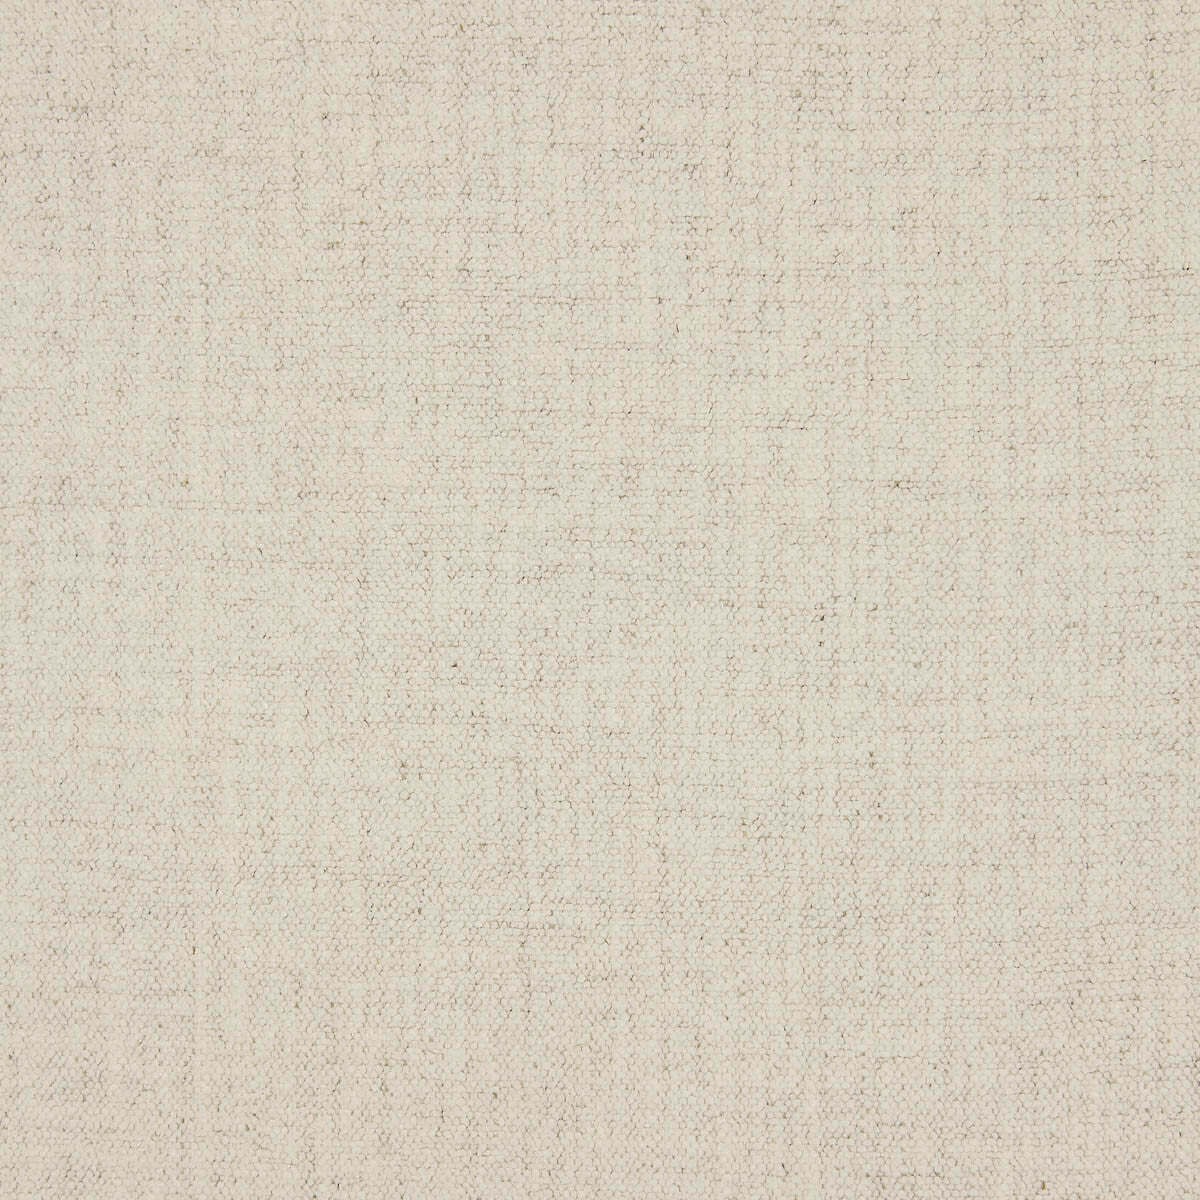 Materica fabric in 7 color - pattern LZ-30412.07.0 - by Kravet Couture in the Lizzo collection